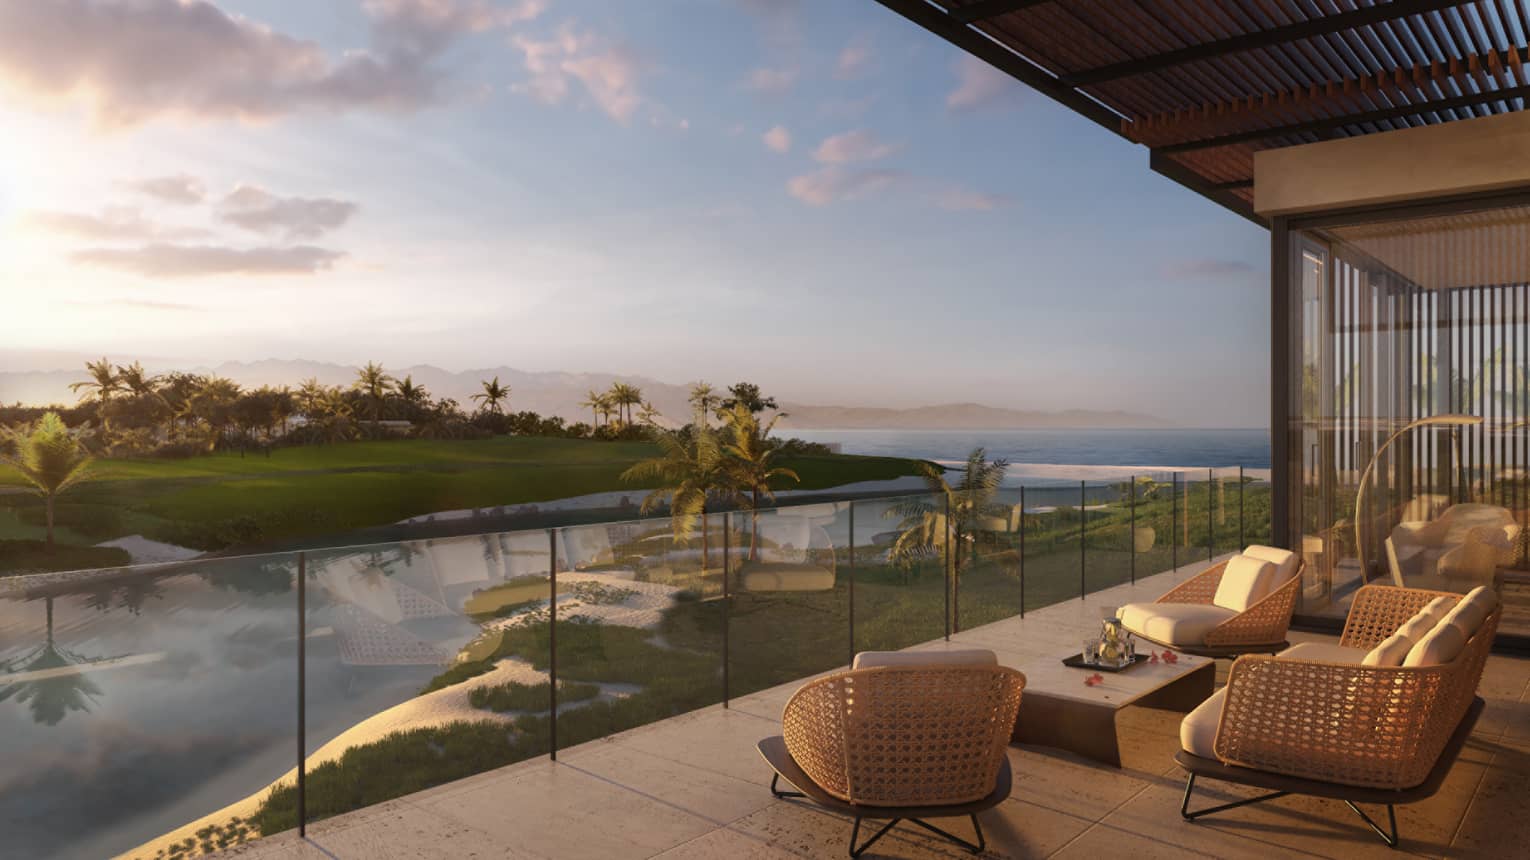 Modern wicker patio furniture by glass balcony overlooking water, green lawns at sunset